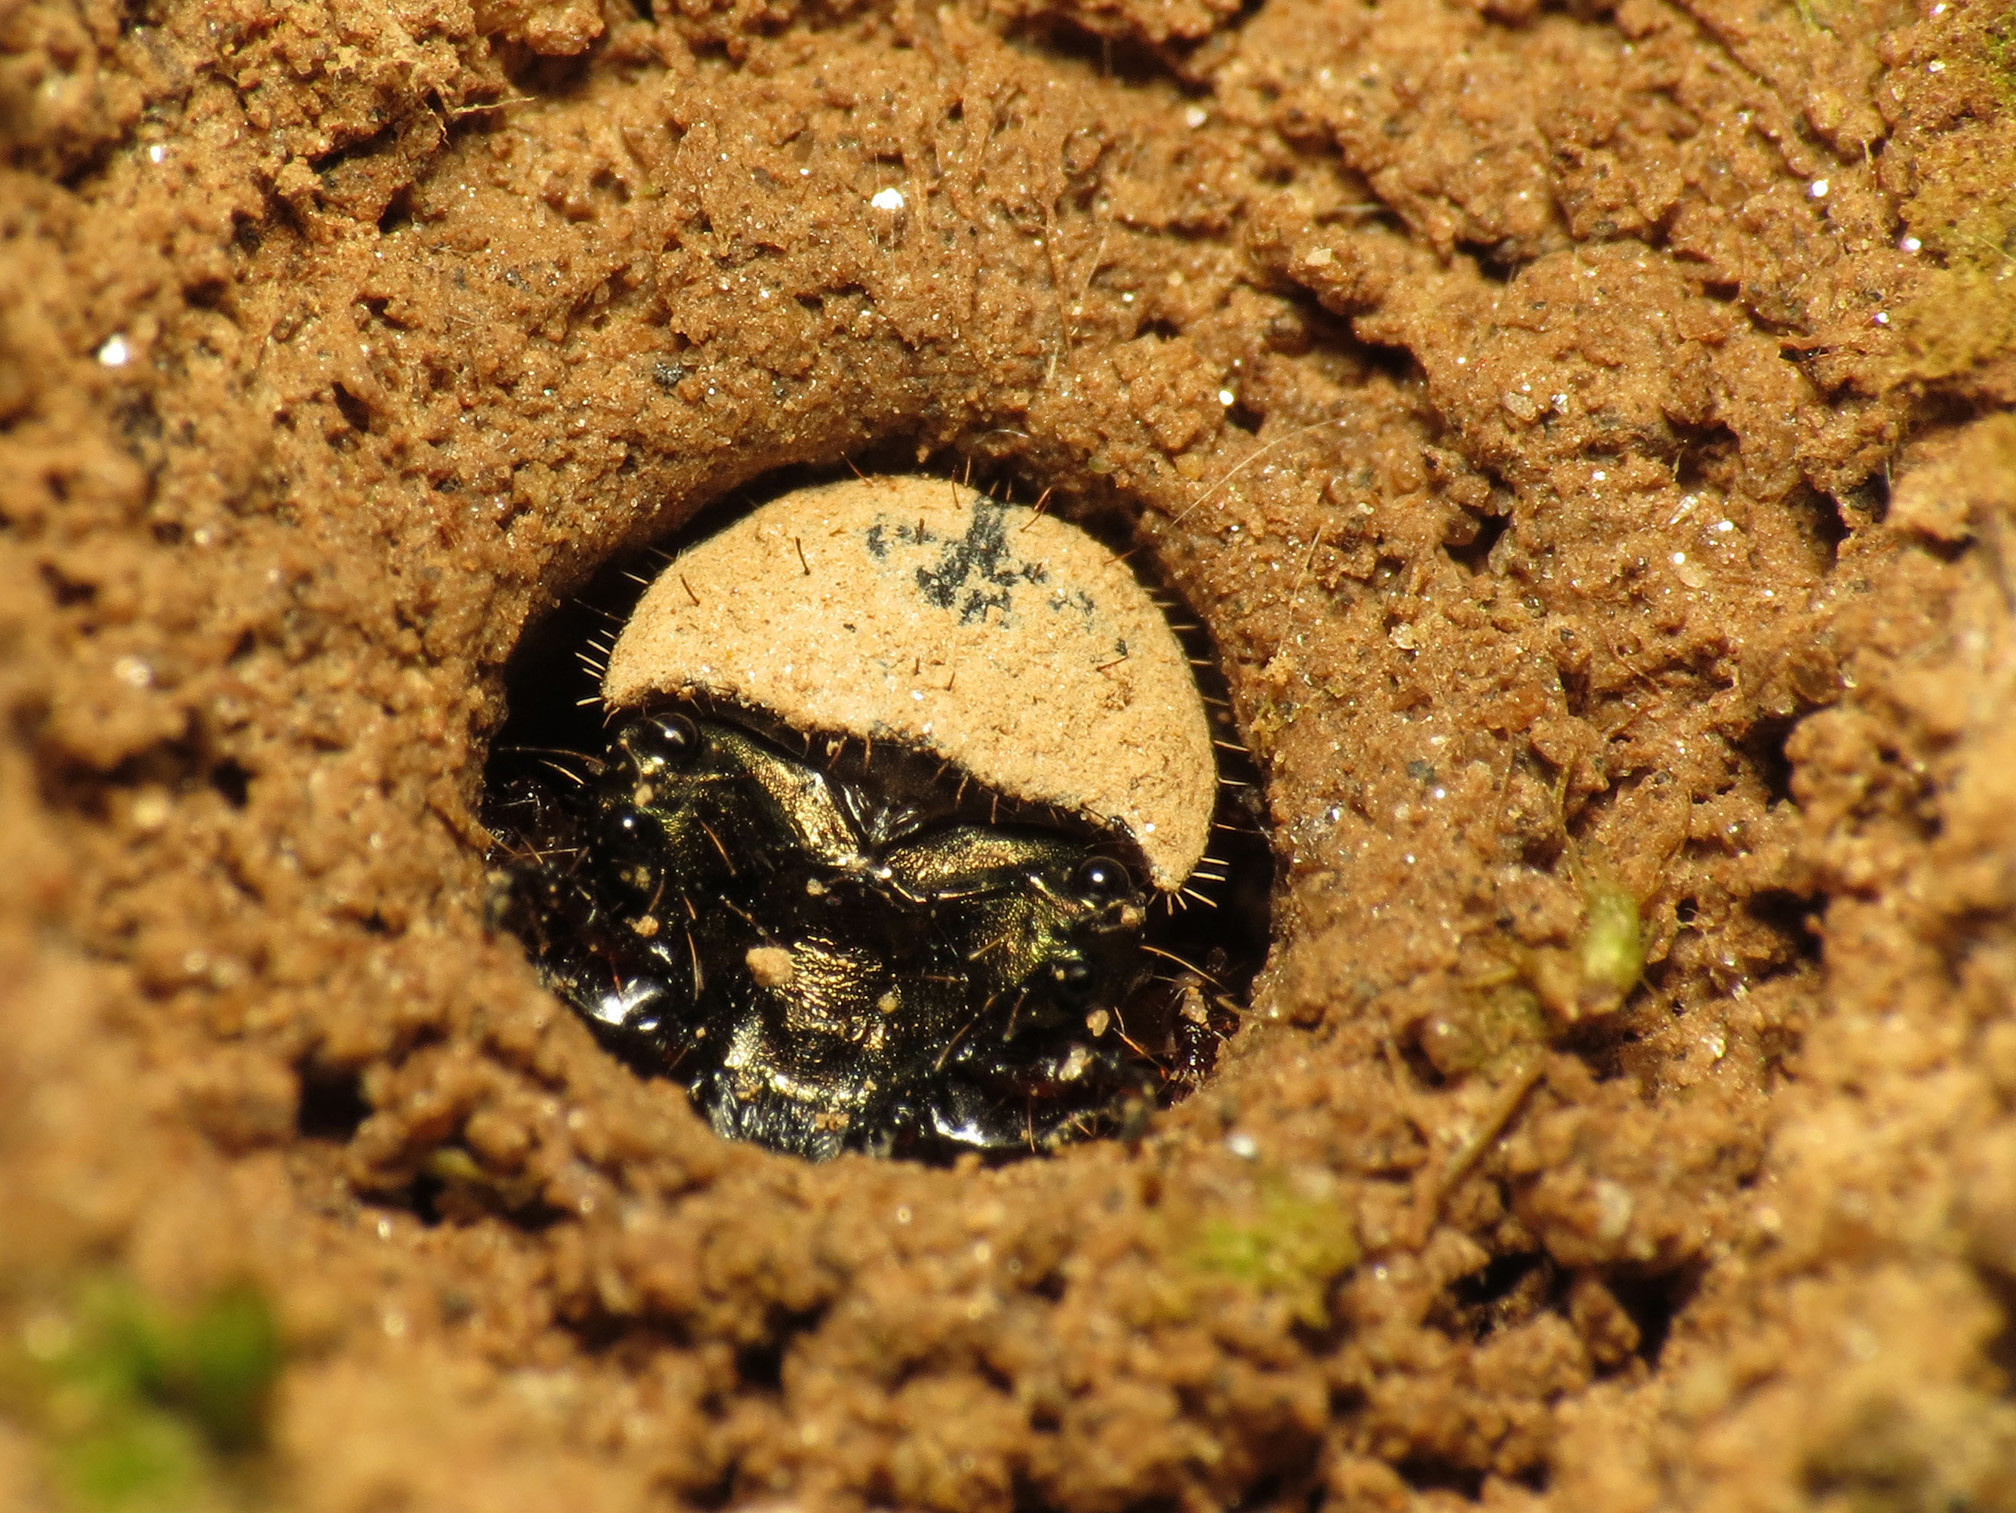 A tiger beetle larva waits in its hole in brown soil, with just its face showing. The hole is circular and its face fills the hole. The upper part of it's face is pale brown with a few hairs. The lower part of it's face is black and shiny.